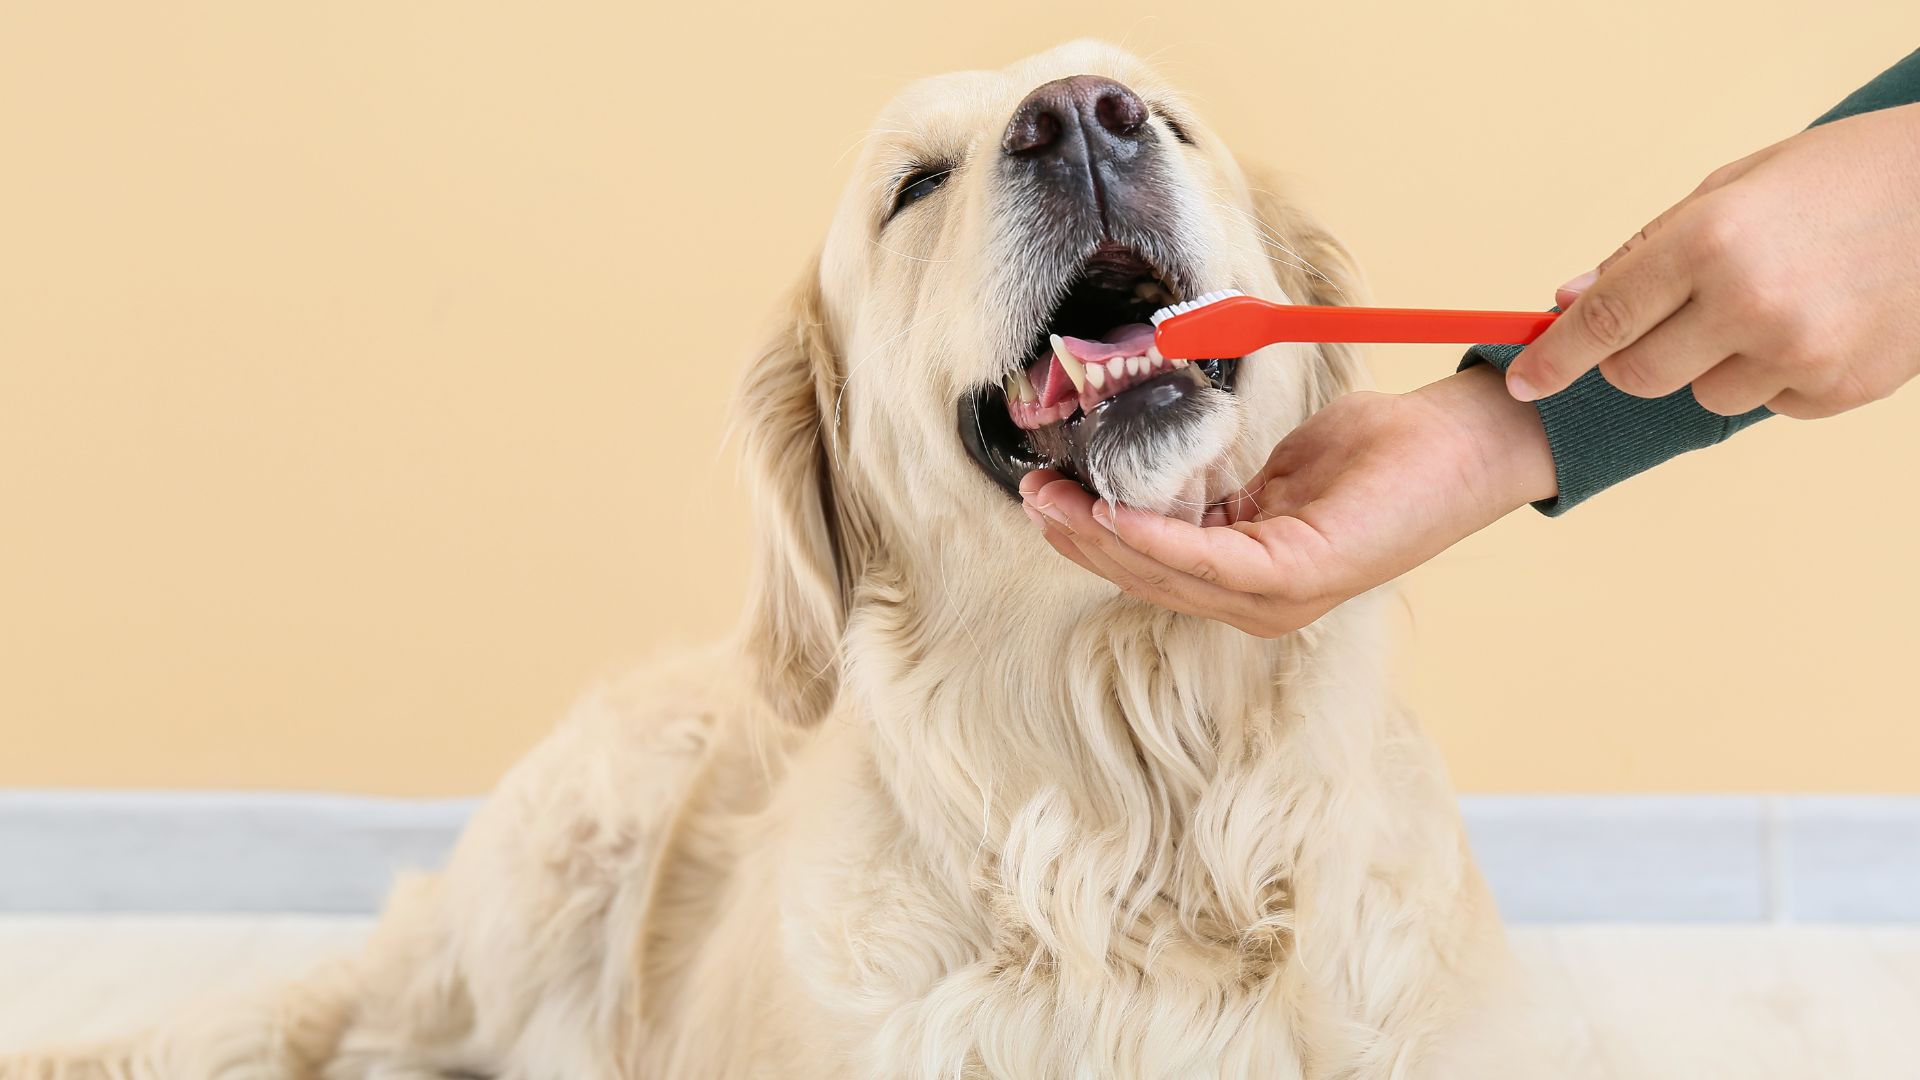 A dog with a toothbrush in its mouth